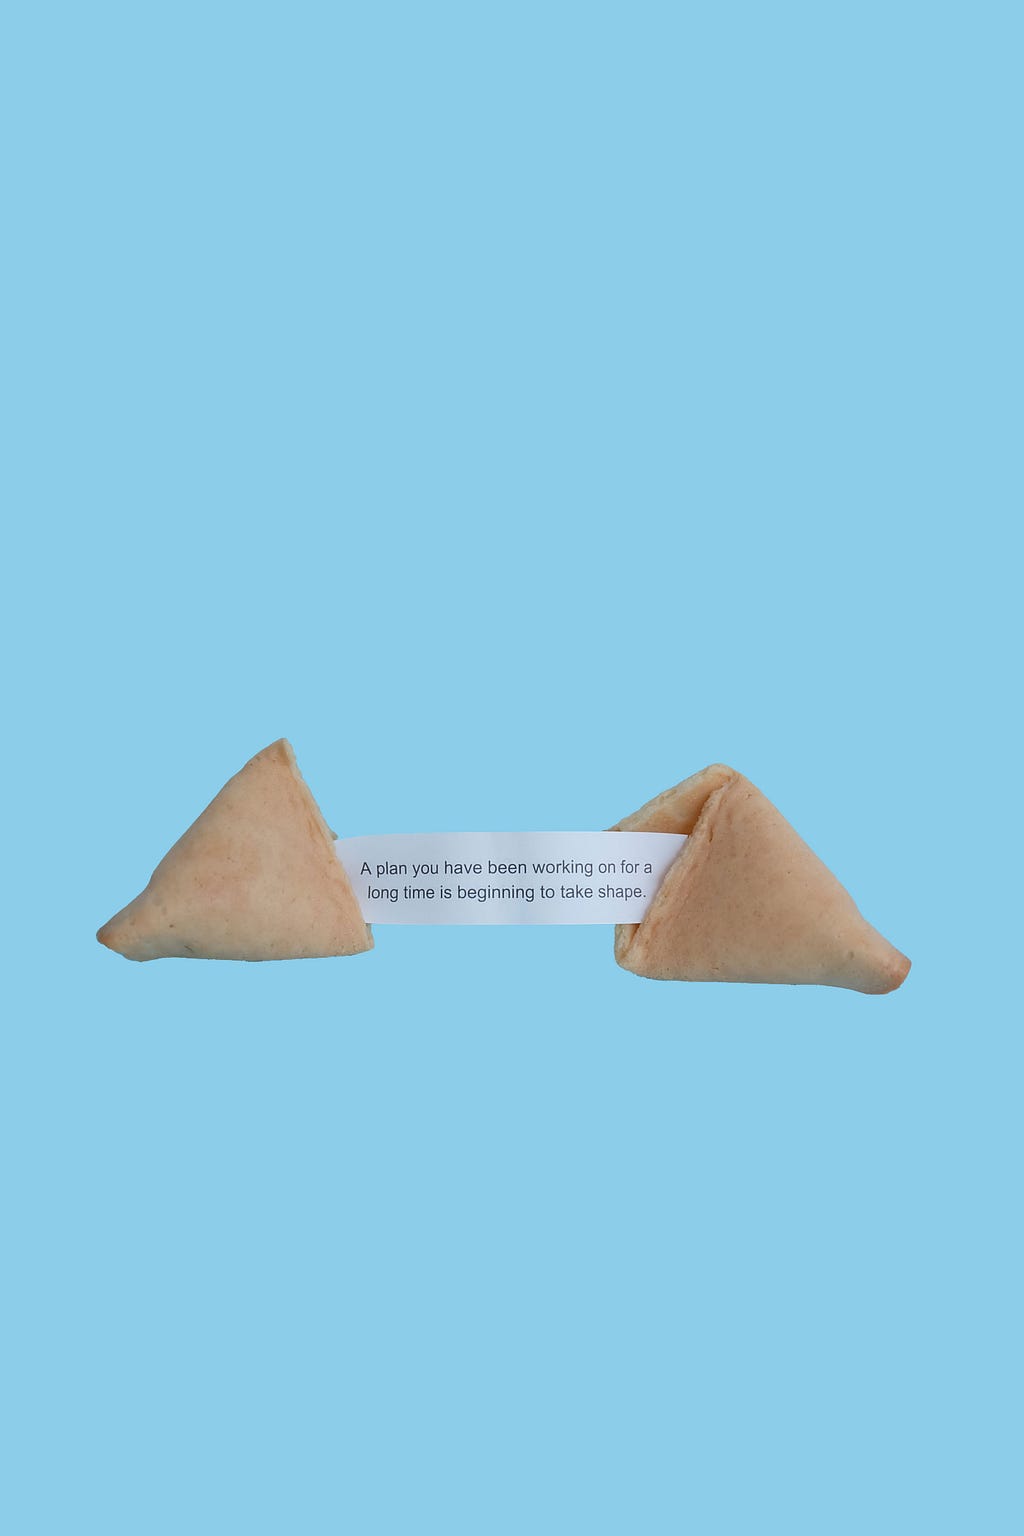 A fortune cookie that opens to read “A plan you have been working on for a long time is beginning to take shape”.